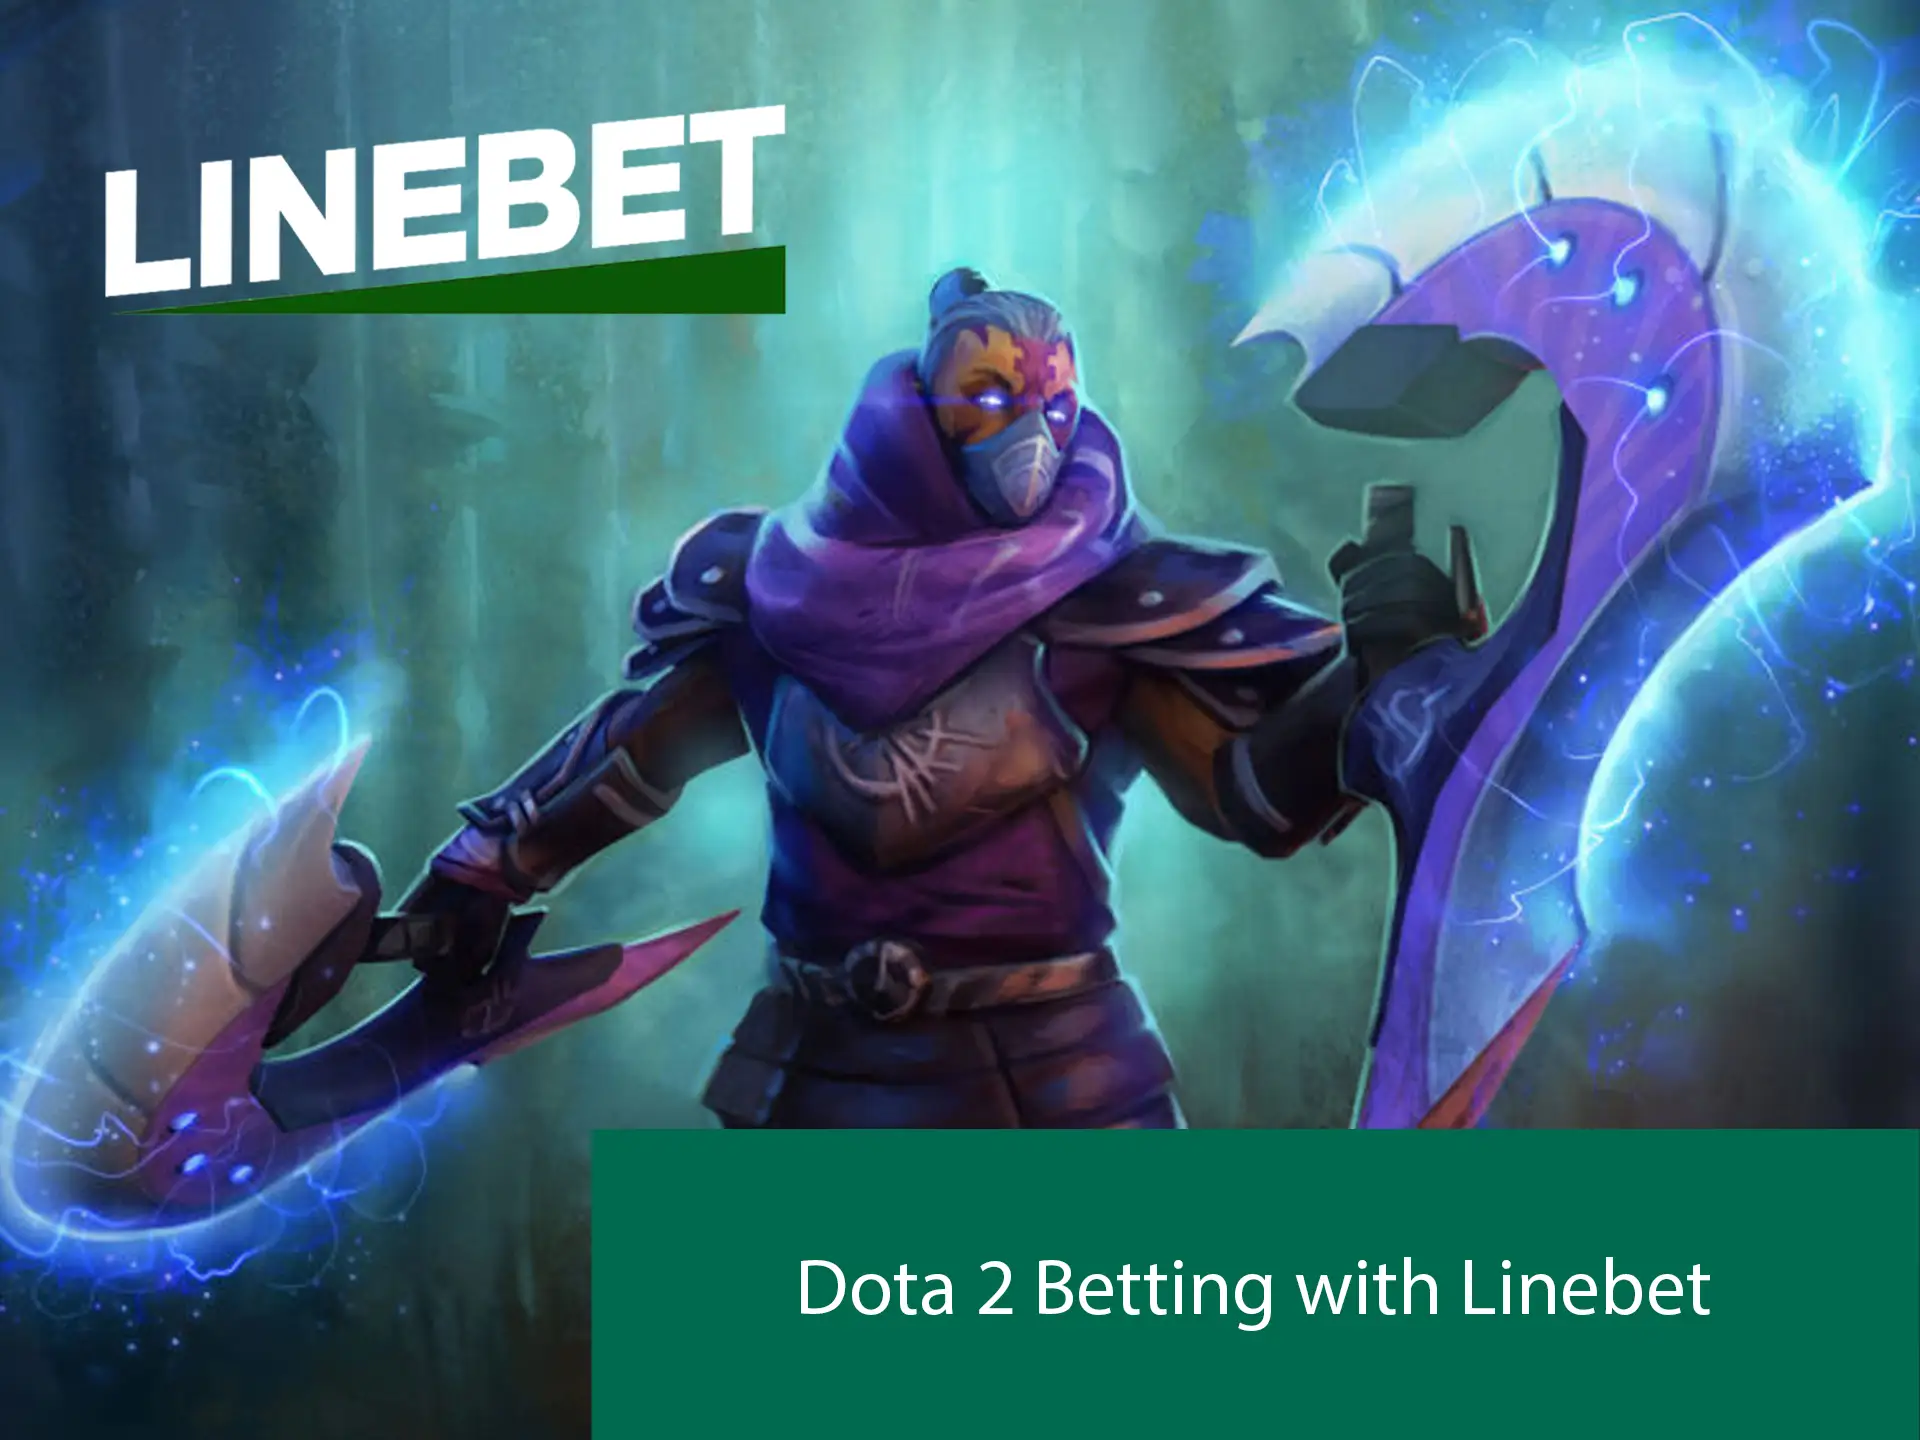 You can not only play Dota 2 but also place bets on Linebet.